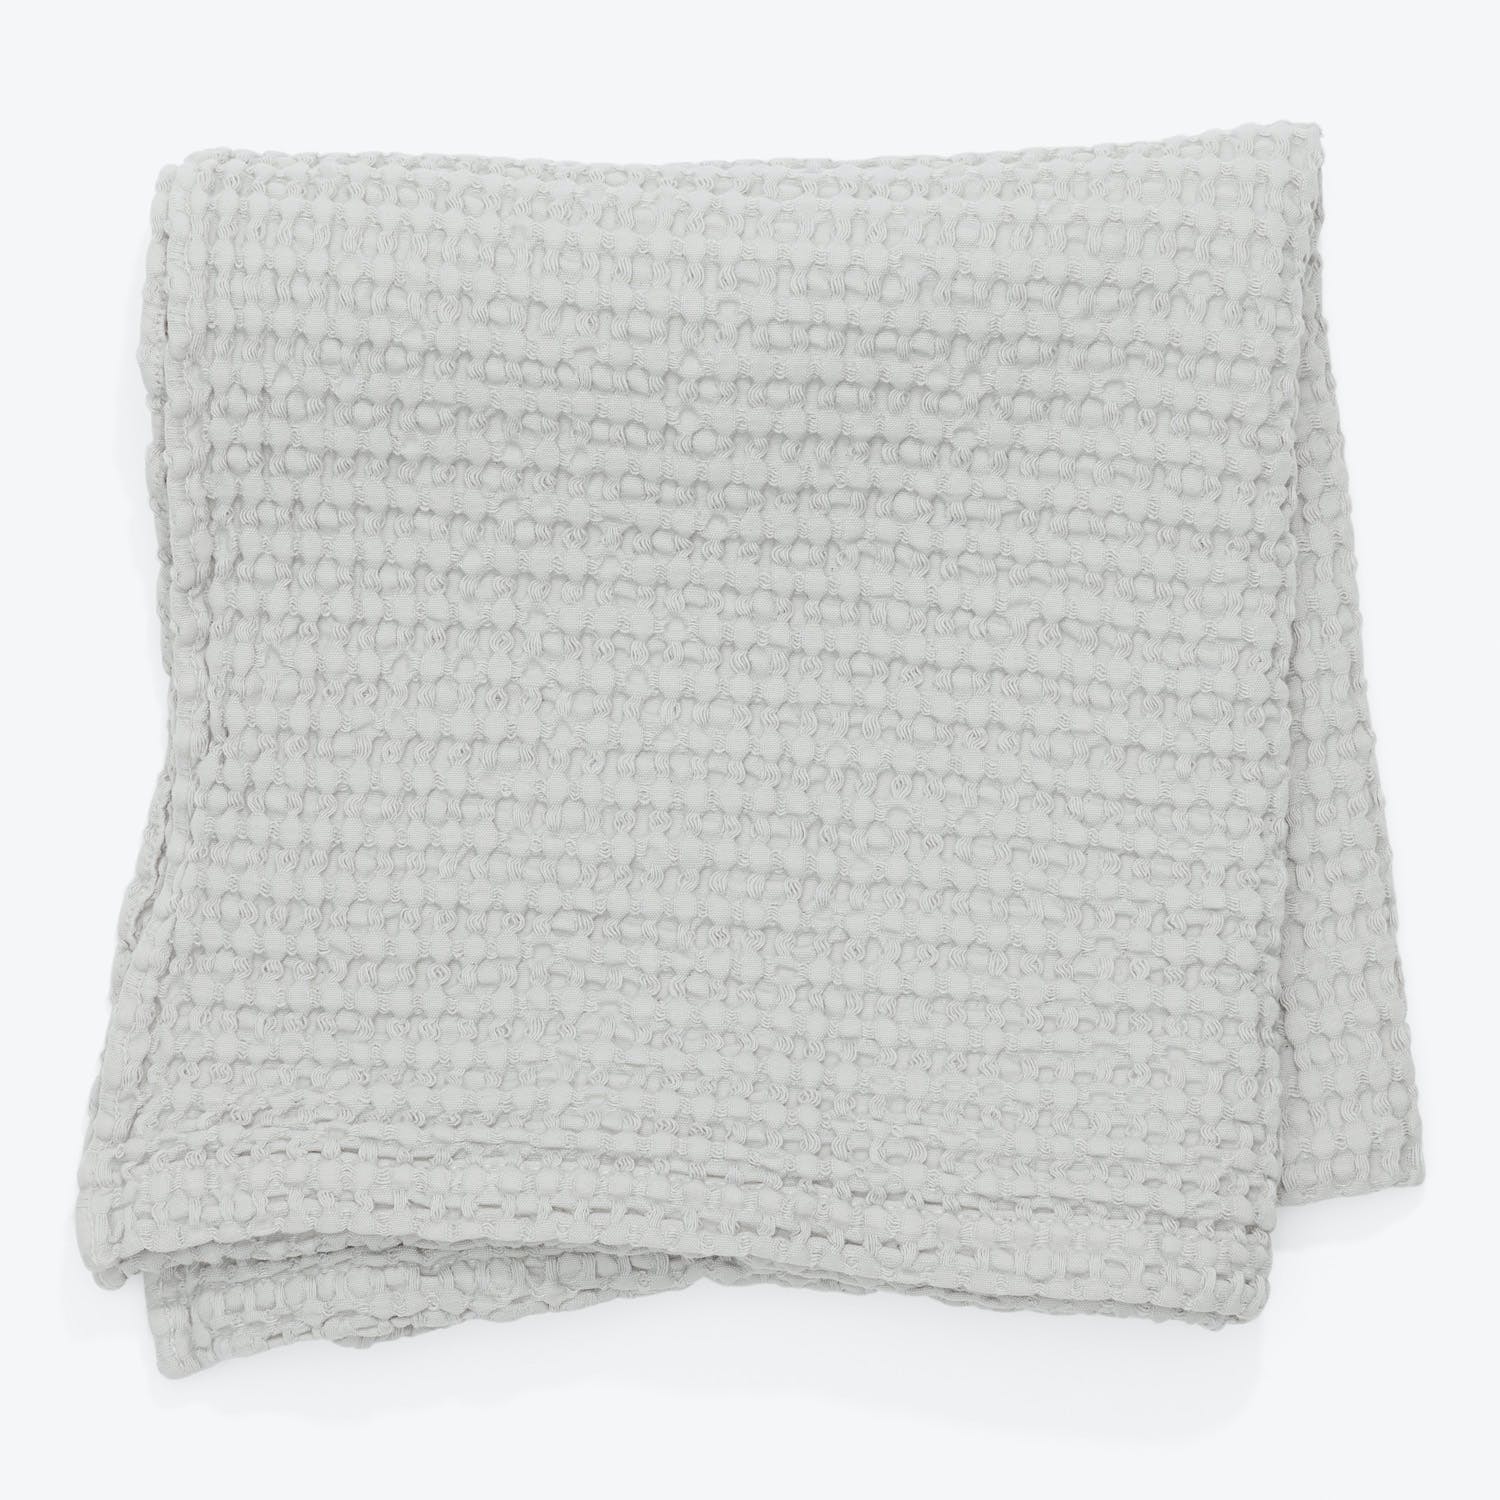 Folded gray blanket with textured design, exuding warmth and comfort.